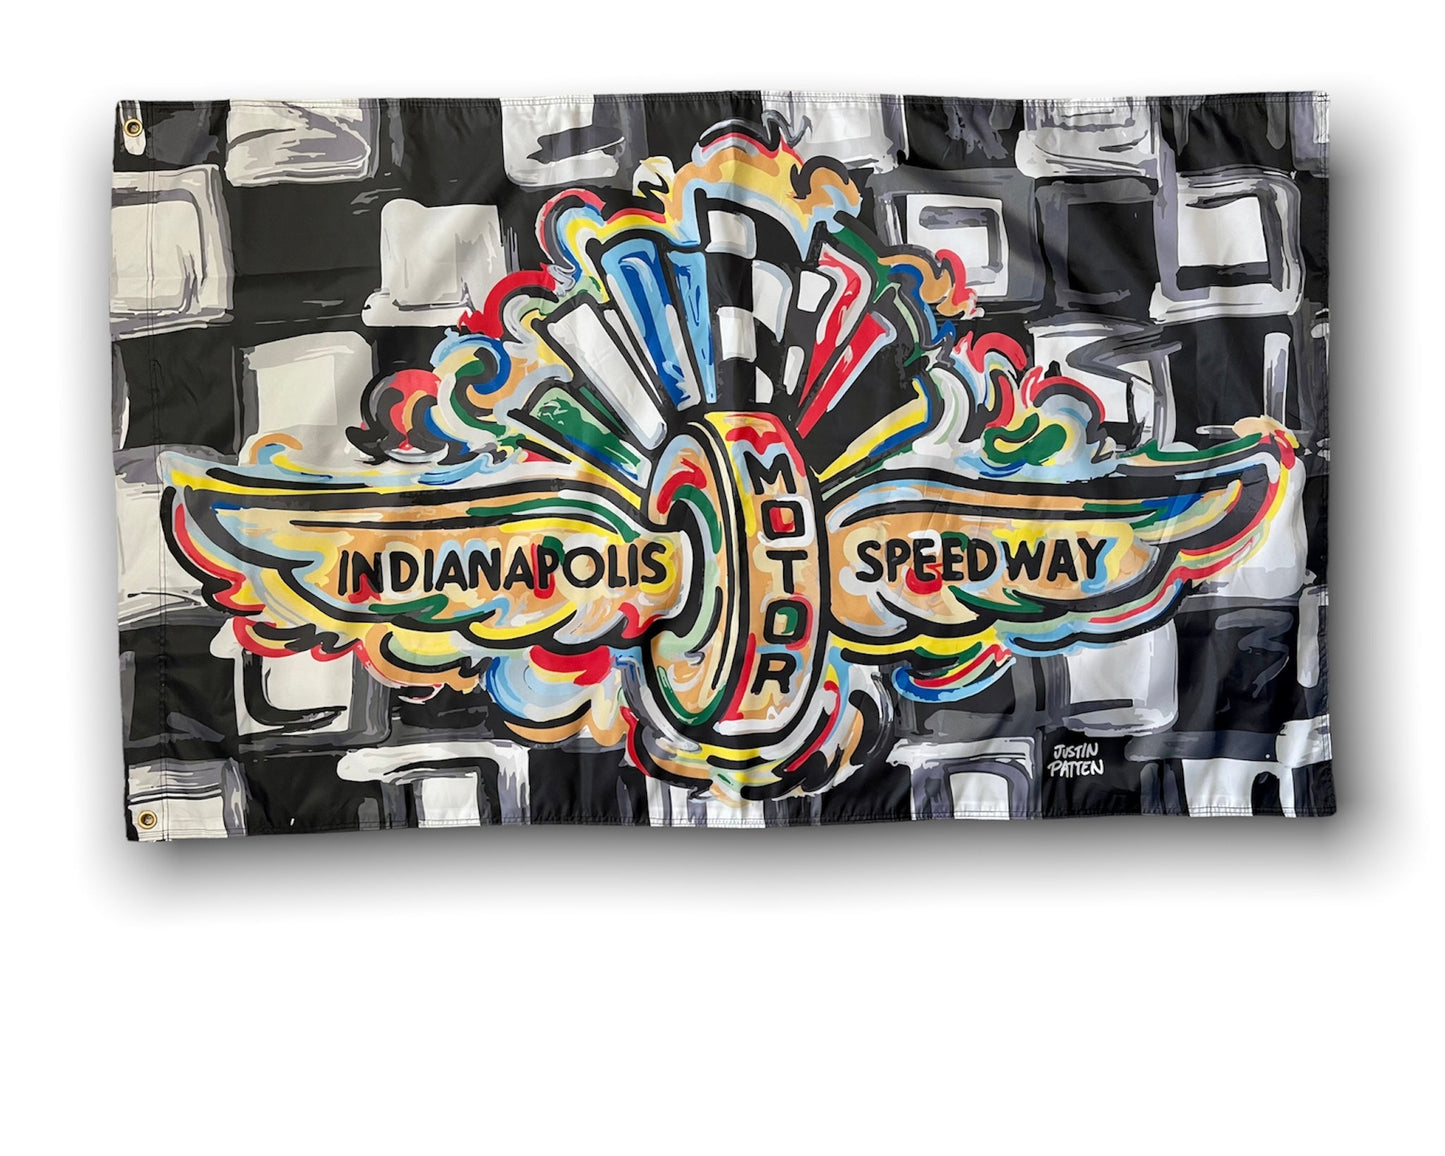 Indianapolis Motor Speedway Wing and Wheel Banner (5’x3’ ft.) by Justin Patten